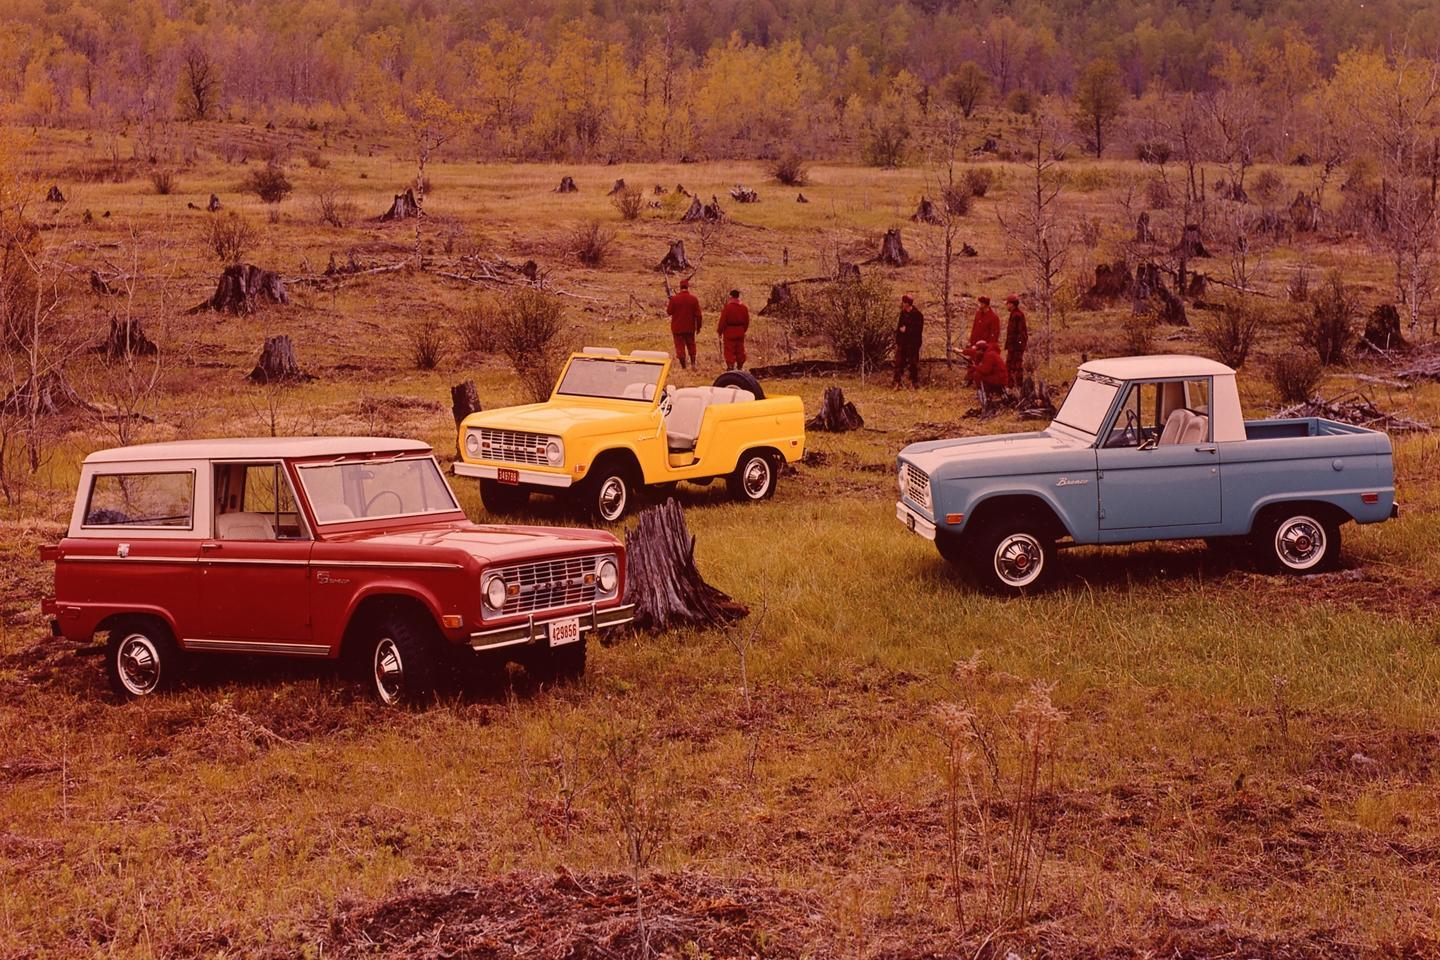 3 Old Ford Bronco models in a field